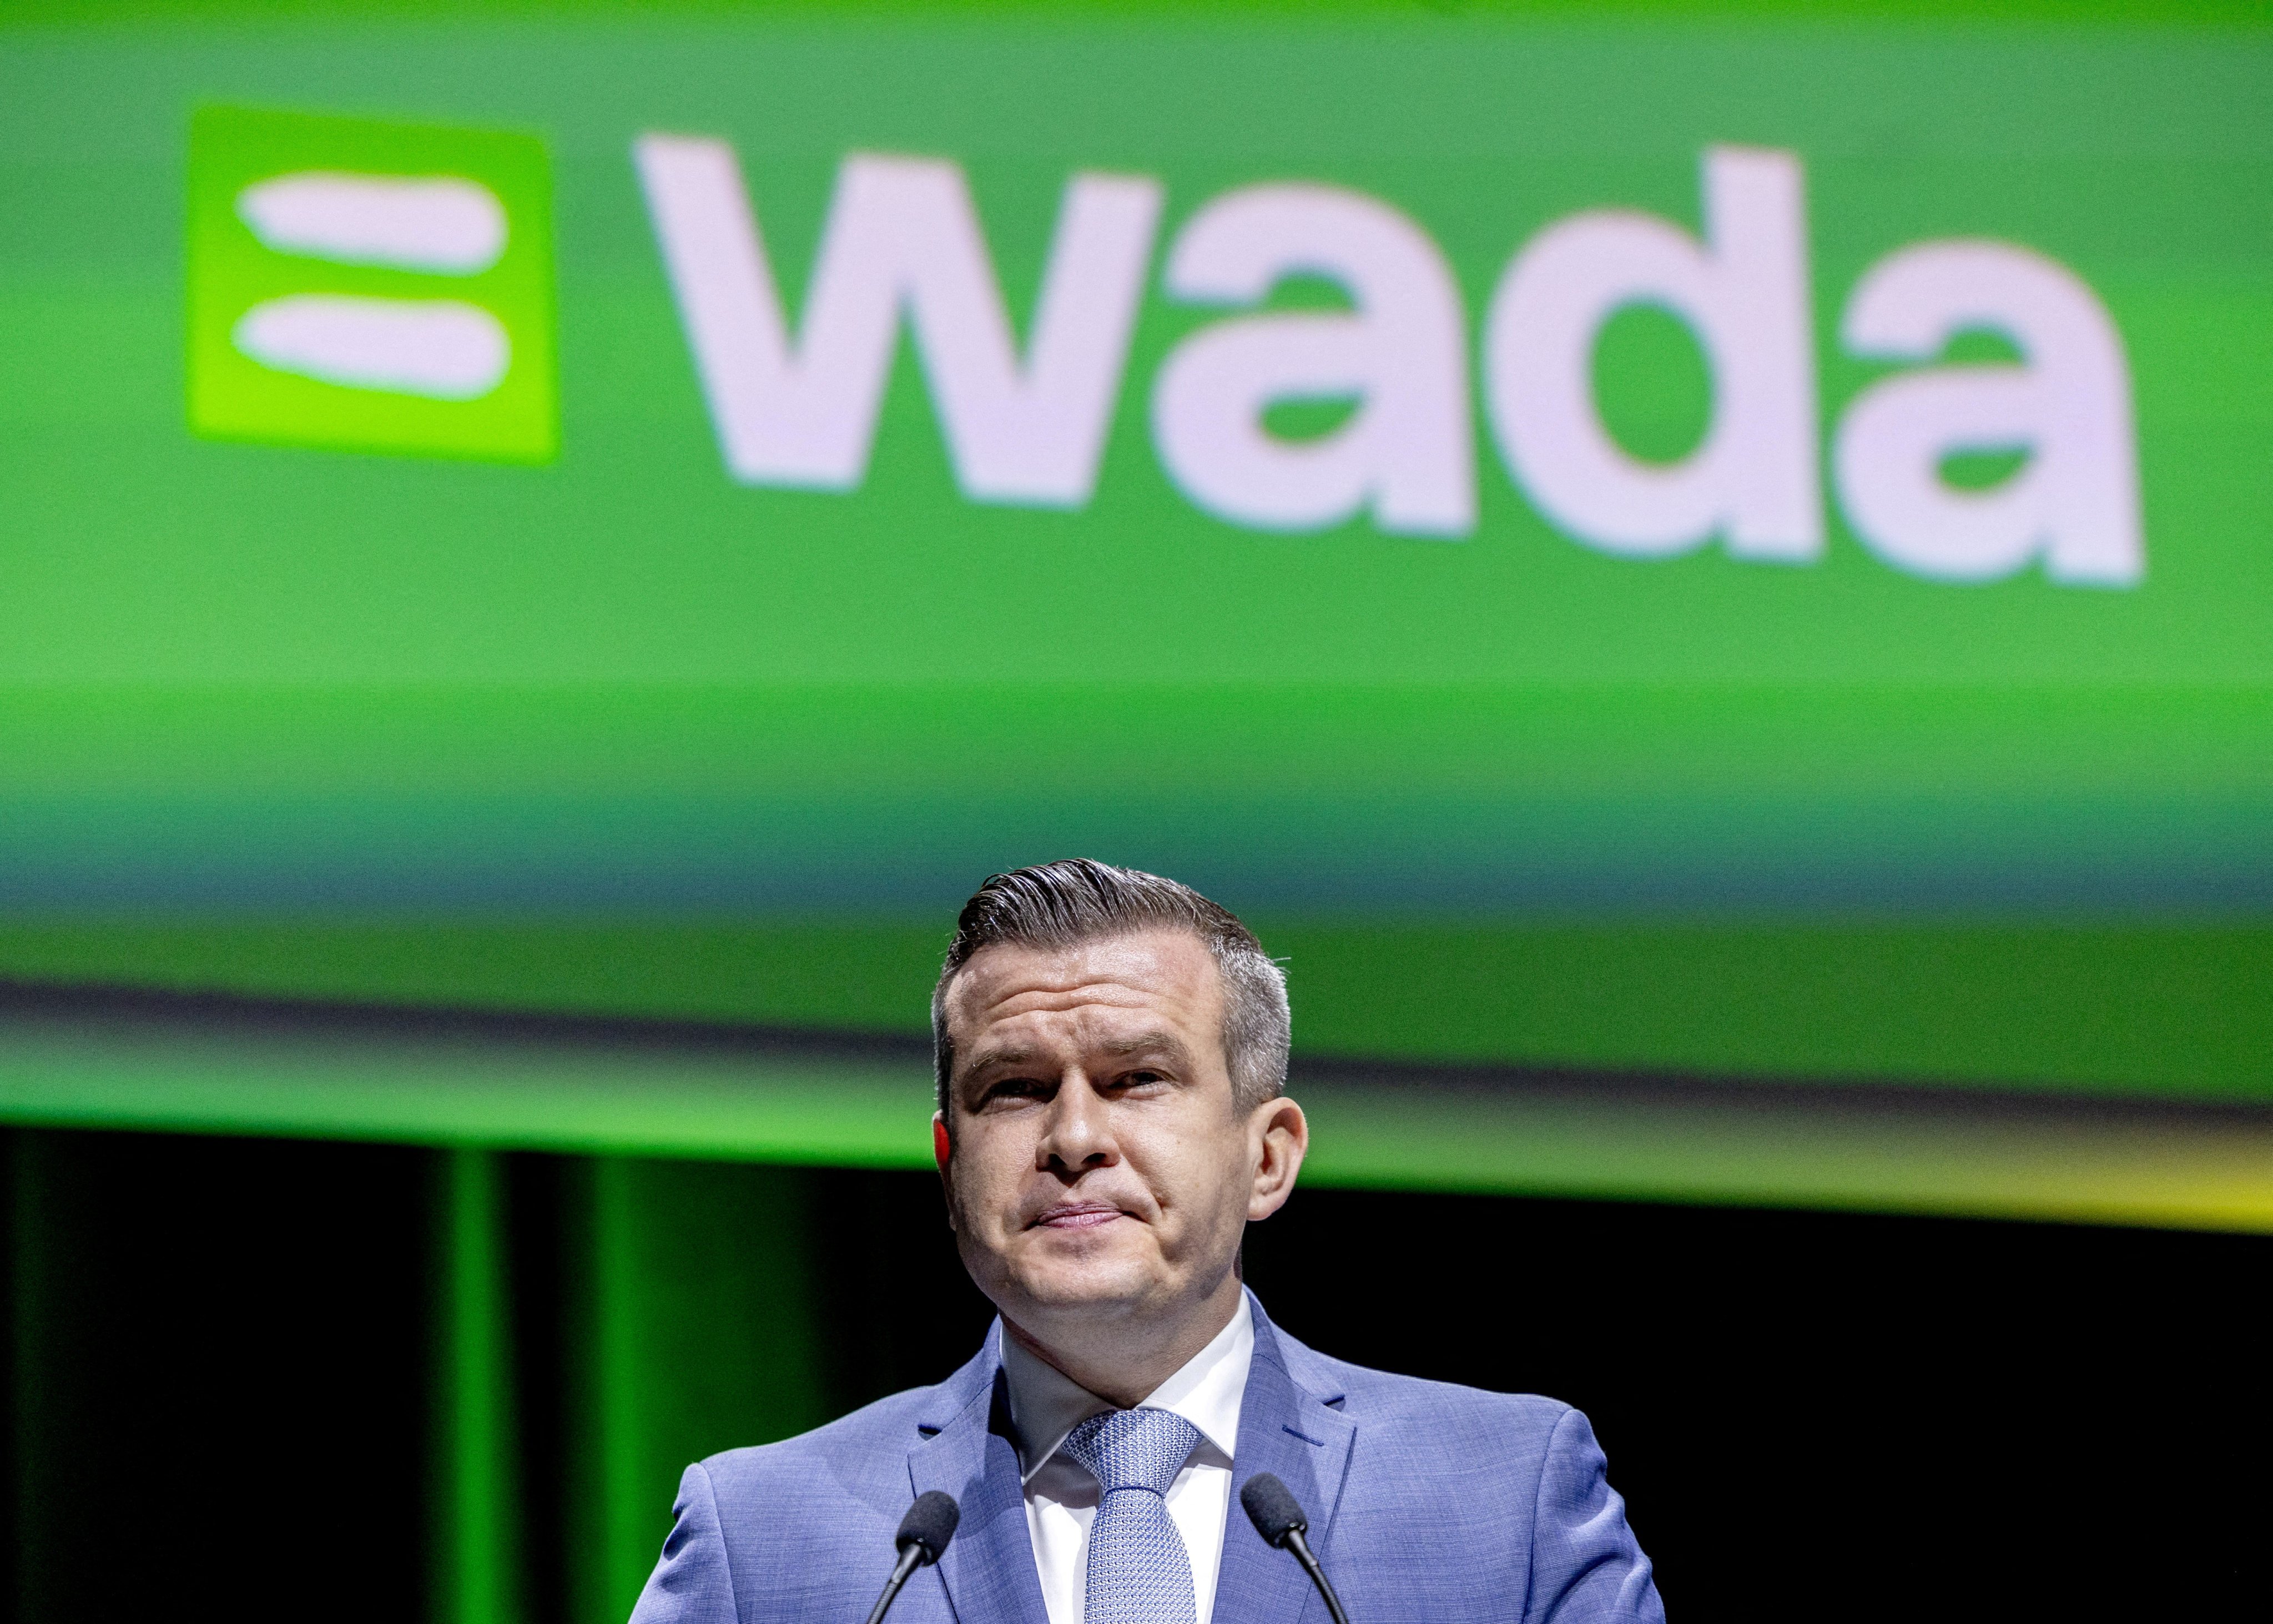 World Anti-Doping Agency president, Witold Banka. Photo: Reuters